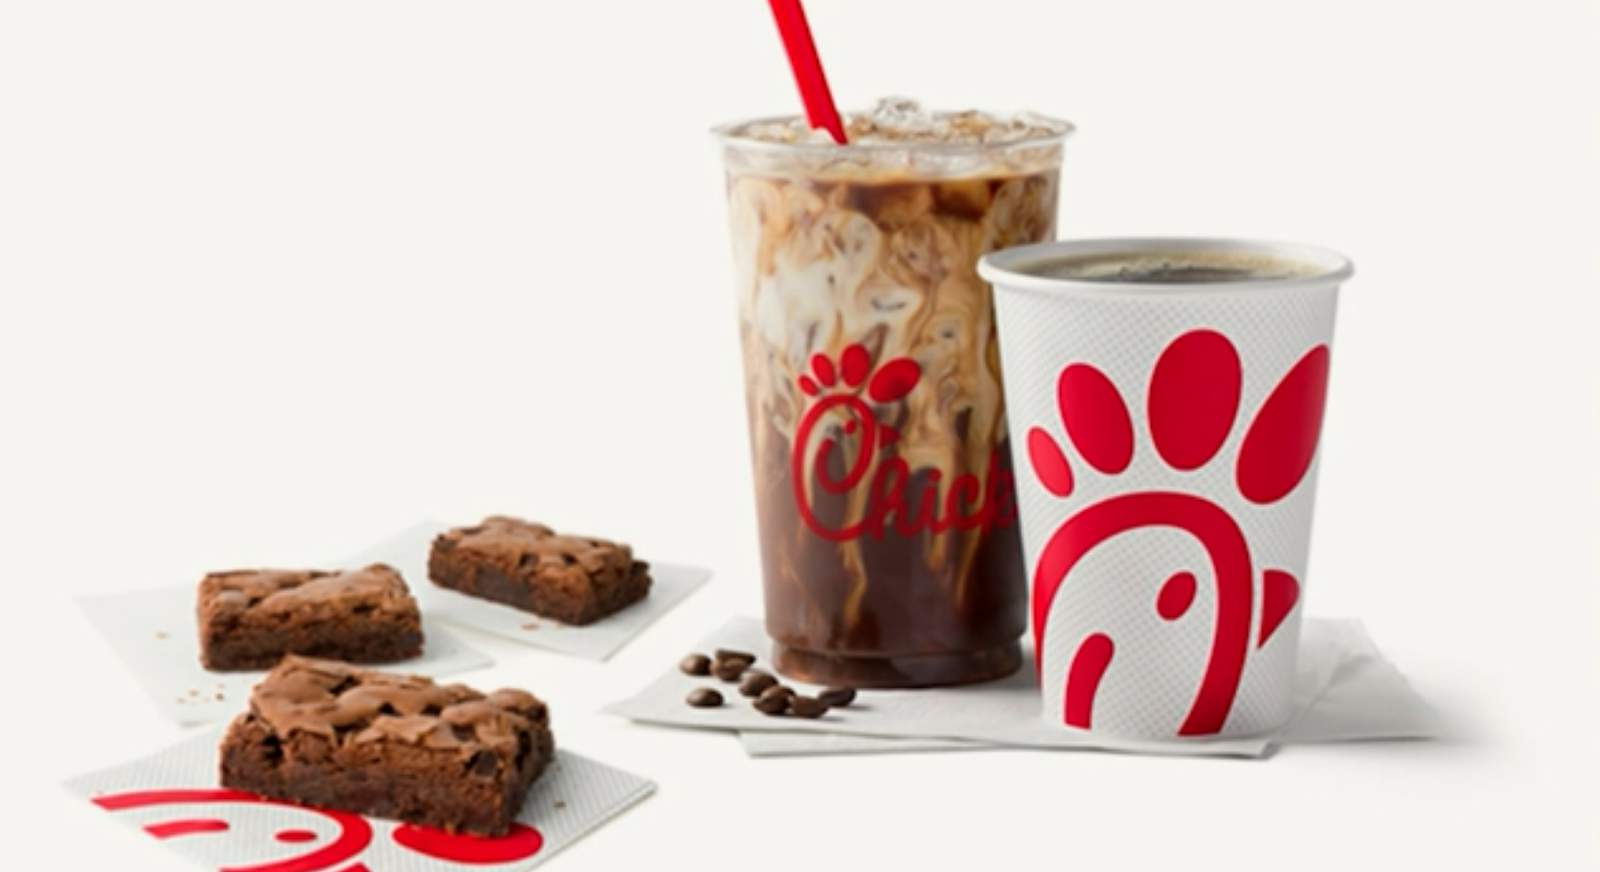 New menu items are brewing at Chick-fil-A